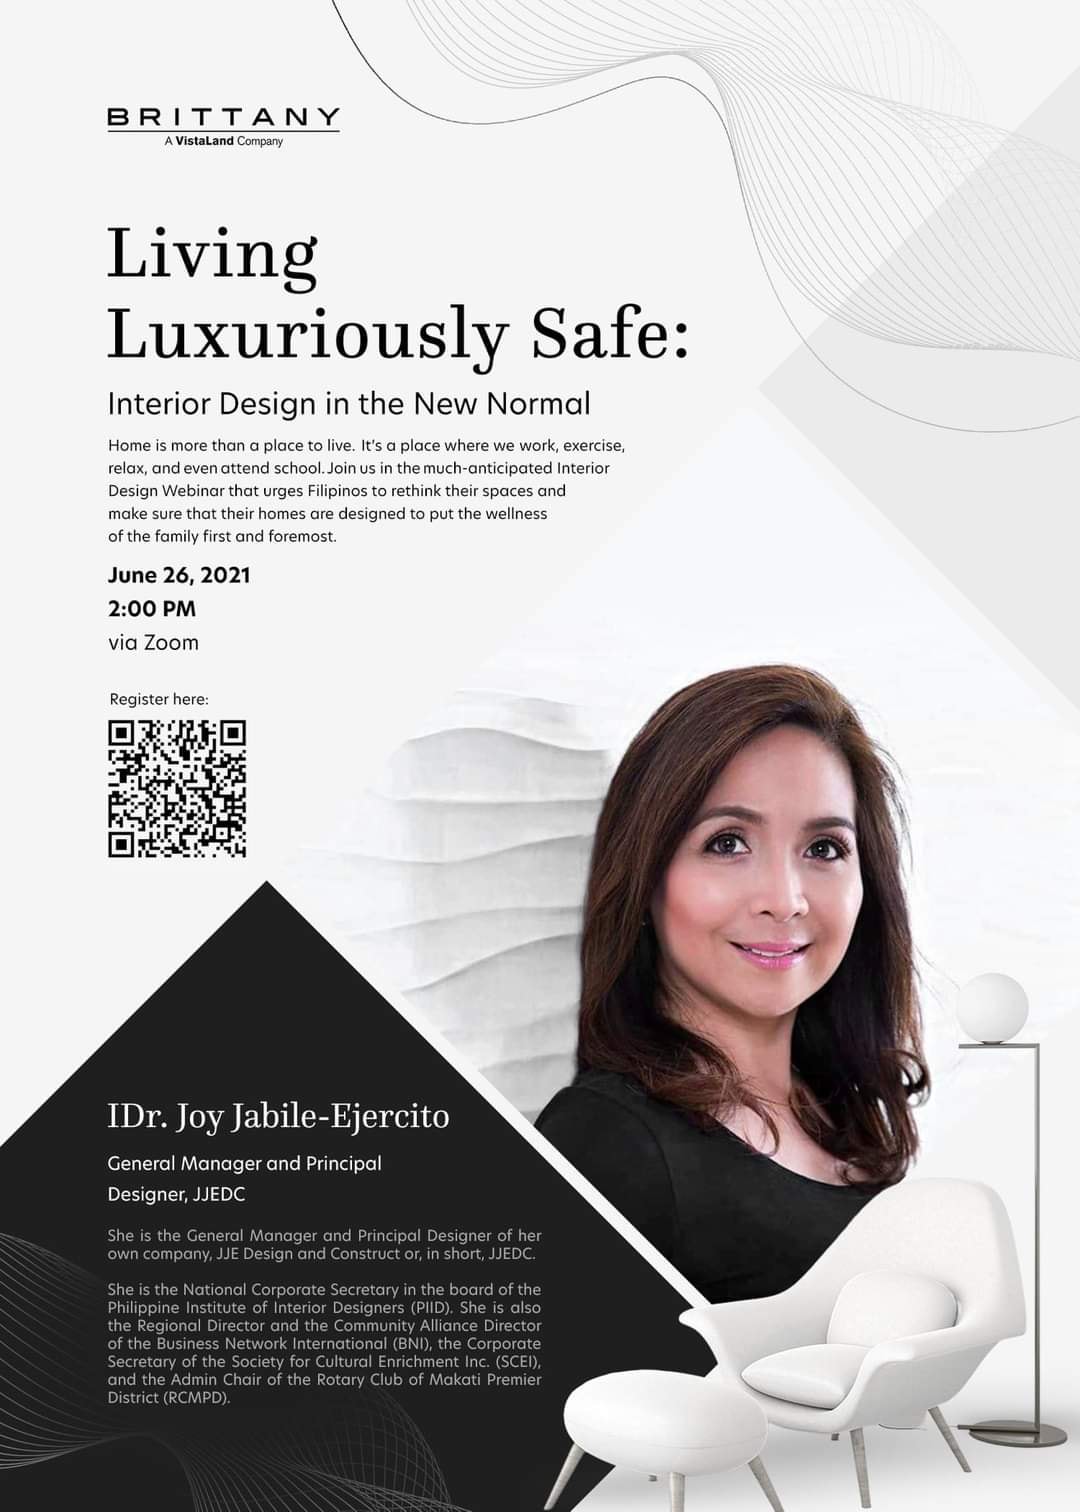 Living Luxuriously Safe: Interior Design in the New Normal